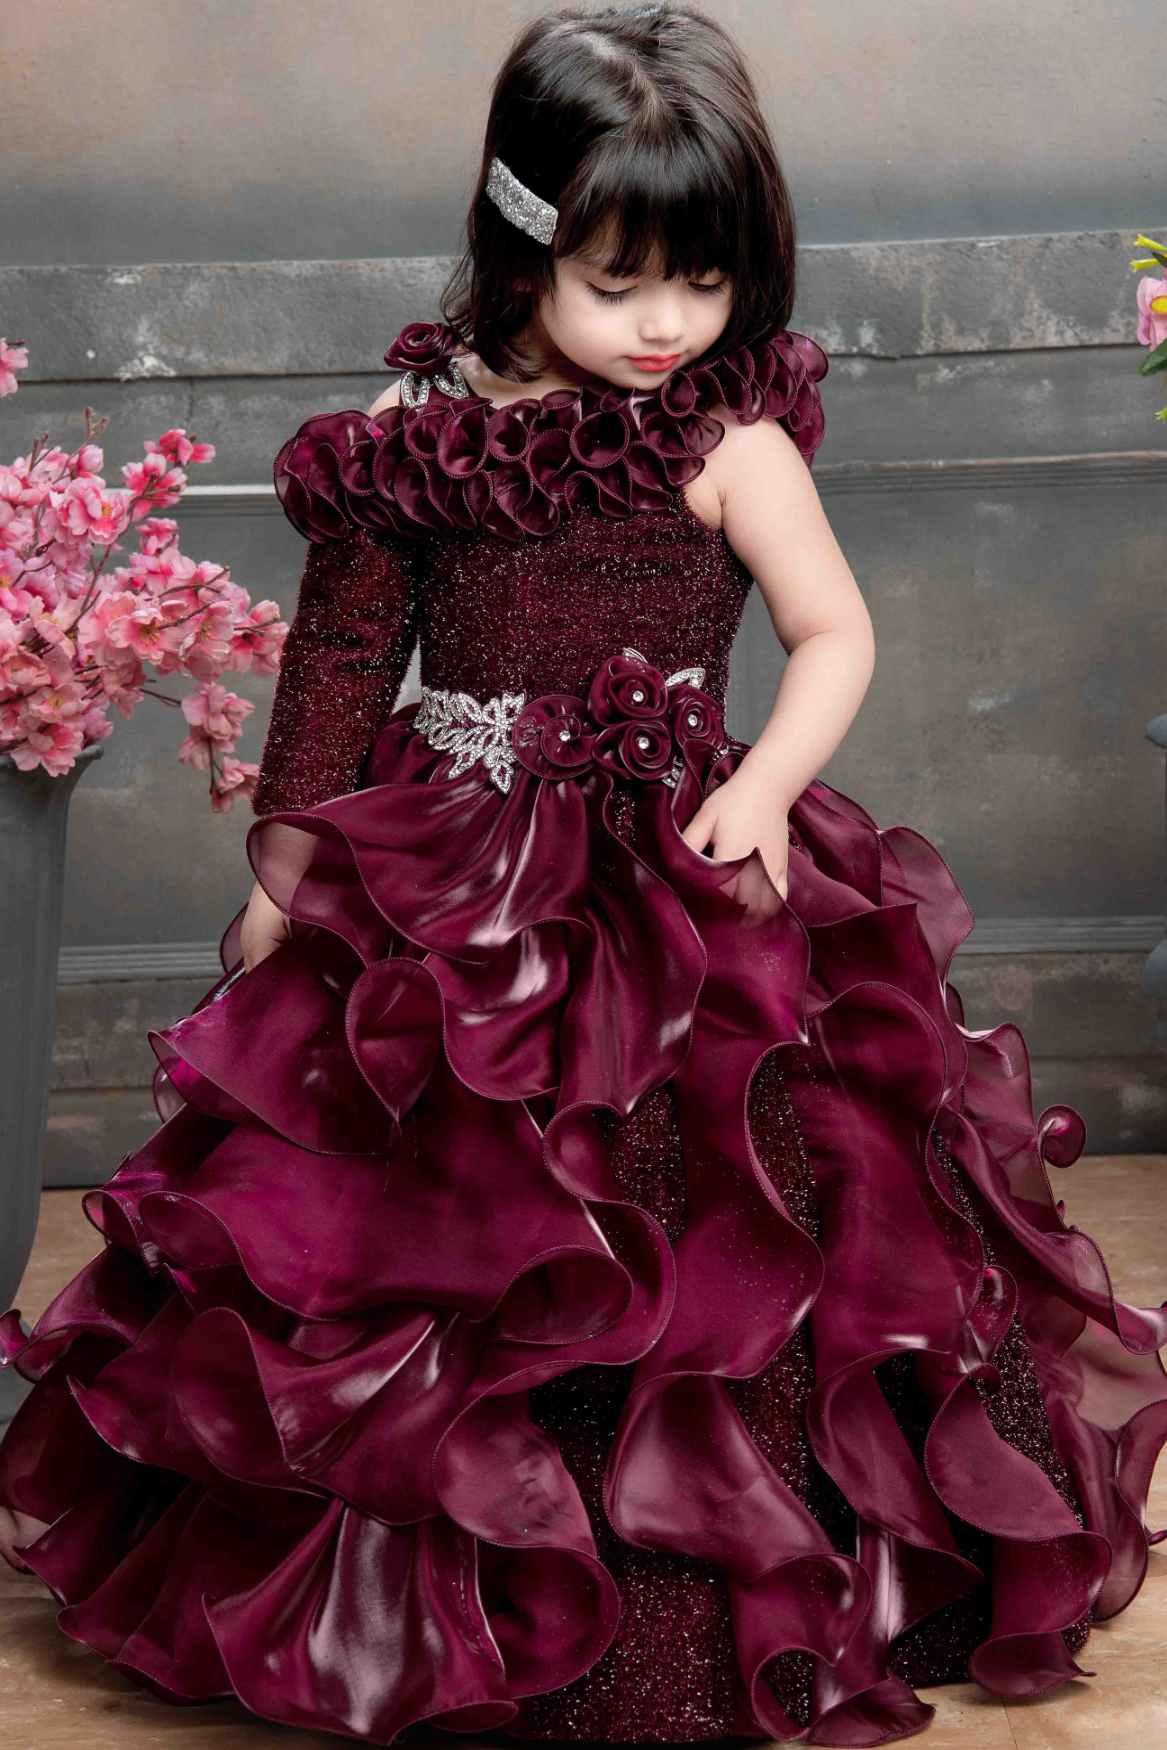 Designer Multilayer Ruffled Maroon Gown With Floral Embellishments For Girls - Lagorii Kids